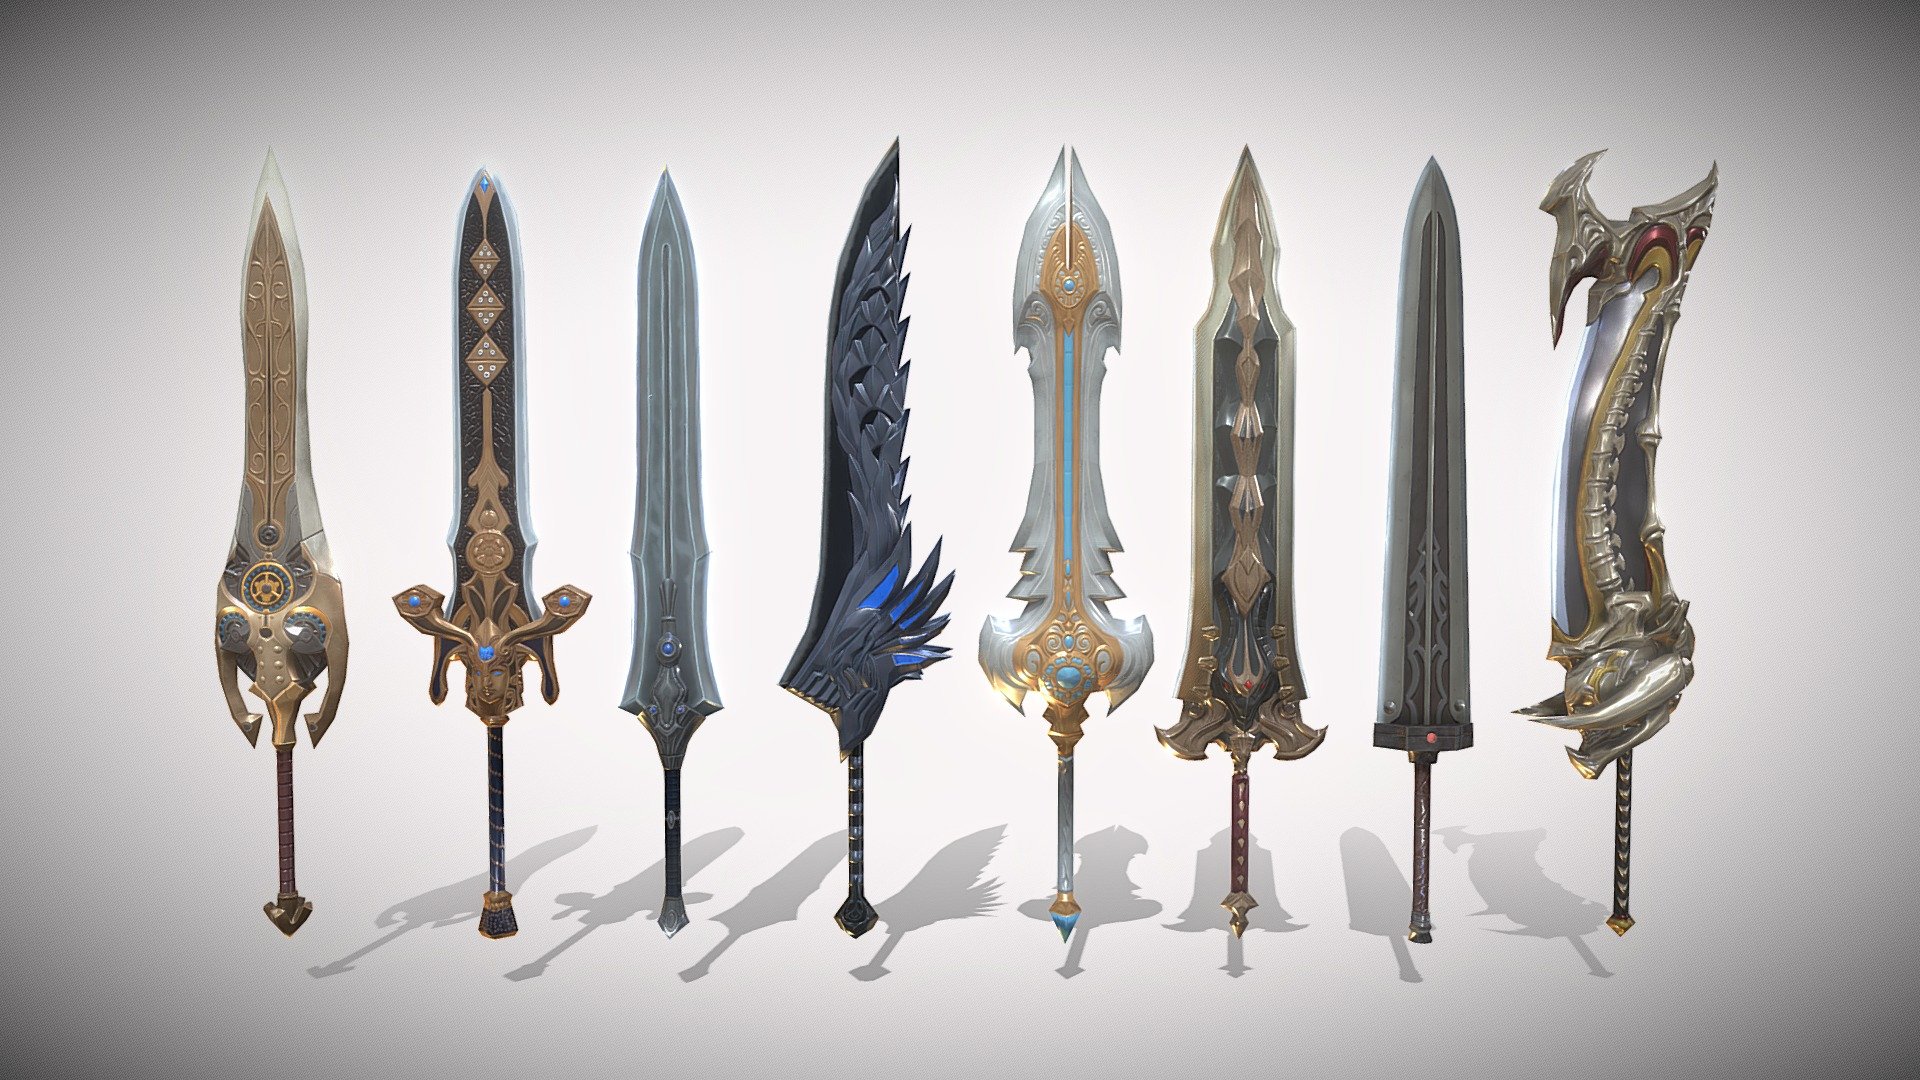 A collection of eight epic battle swords.




Model: about 700 triangles por model.

Mats: diffuse, normal, occlusion and metallic.

Res: 2048 x 2048.

Each sword includes three bones. The first one (&lsquo;Weapon_Point') is the point to grab it, the second and third bones (&lsquo;FX_Weapon_B' and &lsquo;FX_Weapon_T') can be used to add a trail 3d model